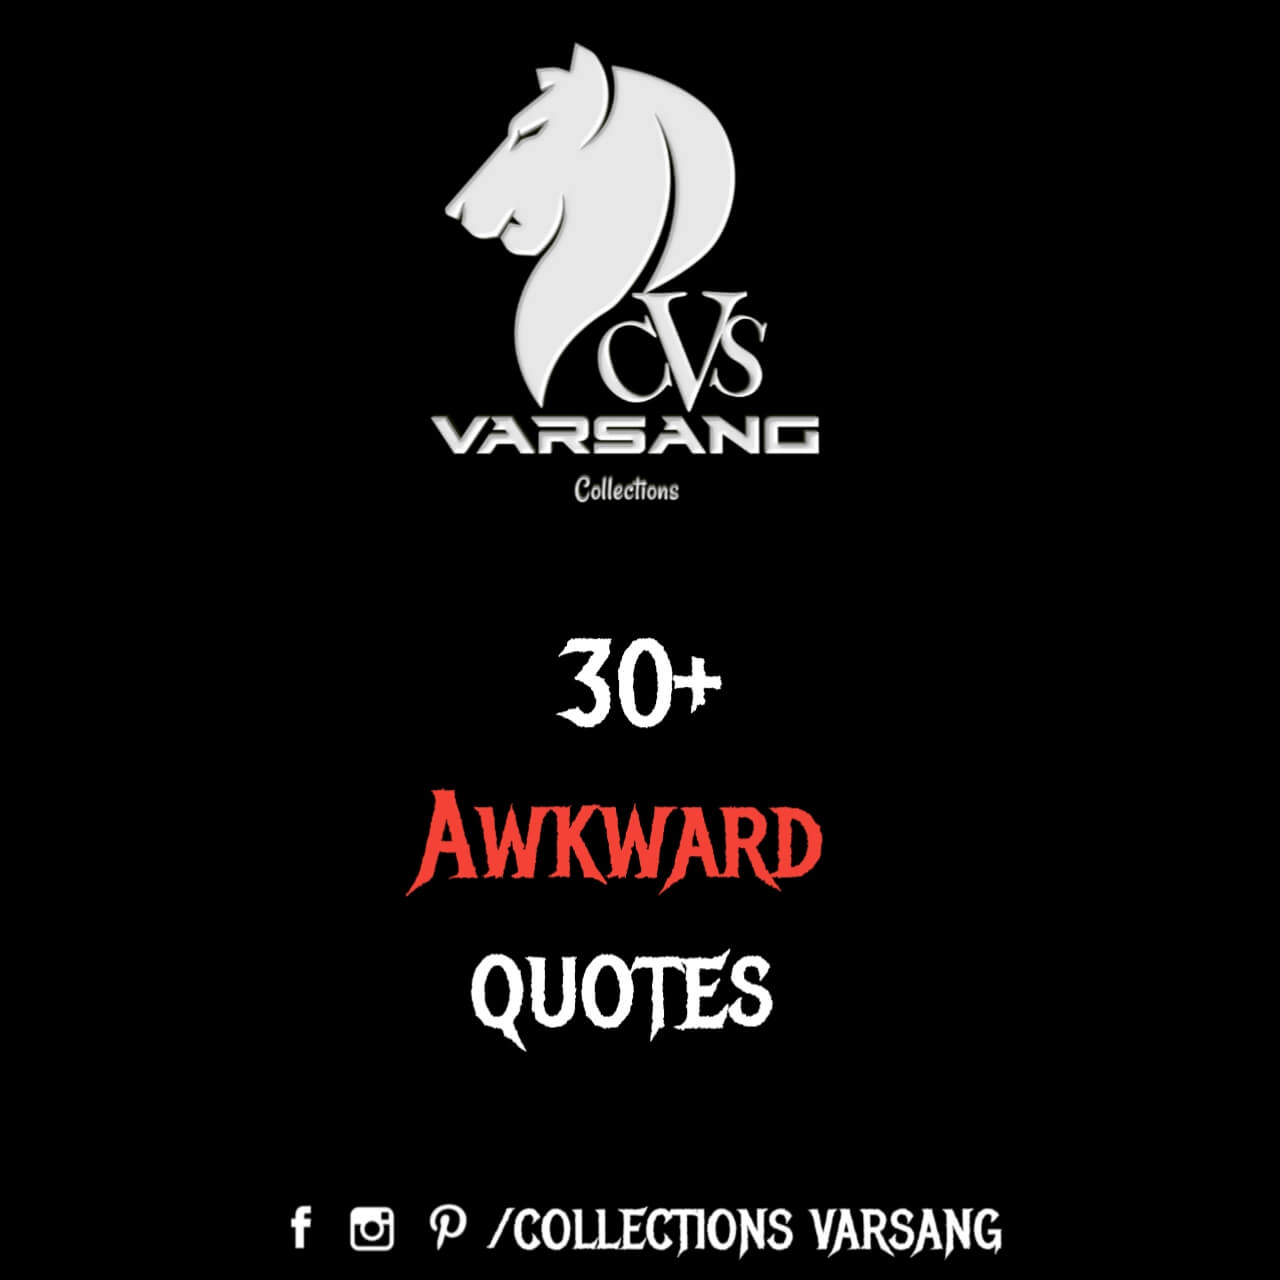 quotes about being awkward-(collectionsvs.com)